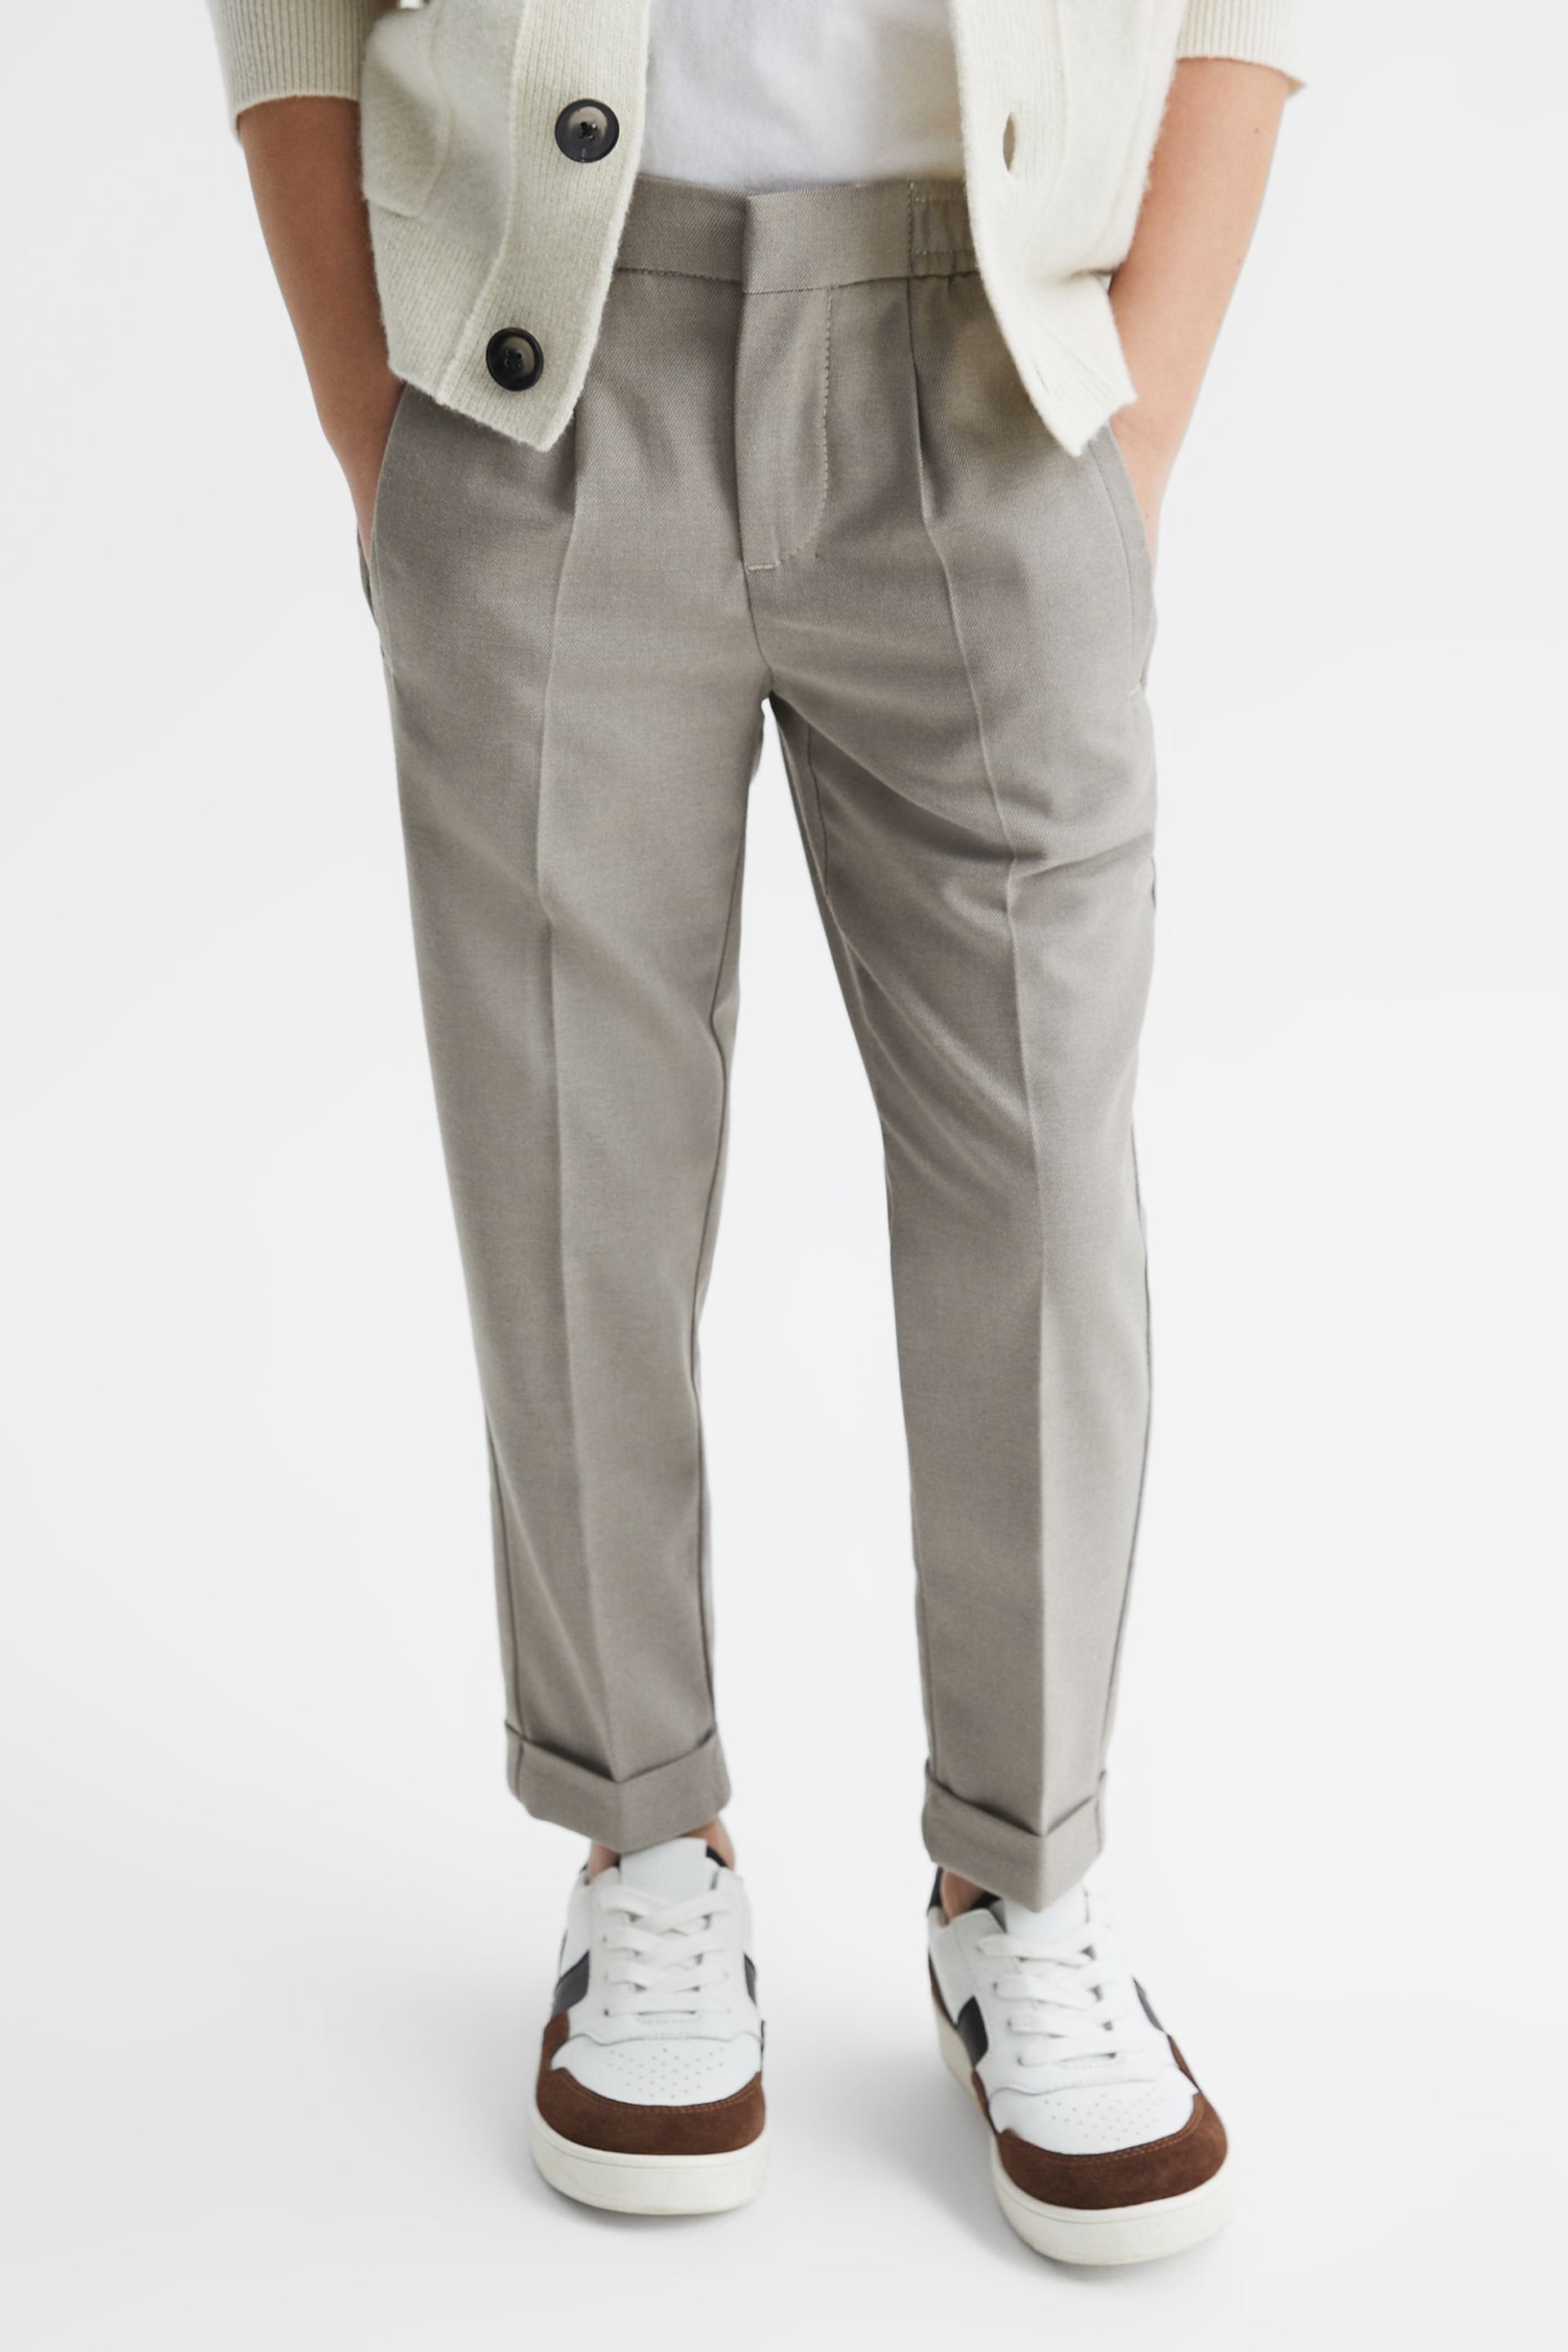 Reiss Taupe Brighton Senior Relaxed Elasticated Trousers with Turn-Ups - Image 3 of 7